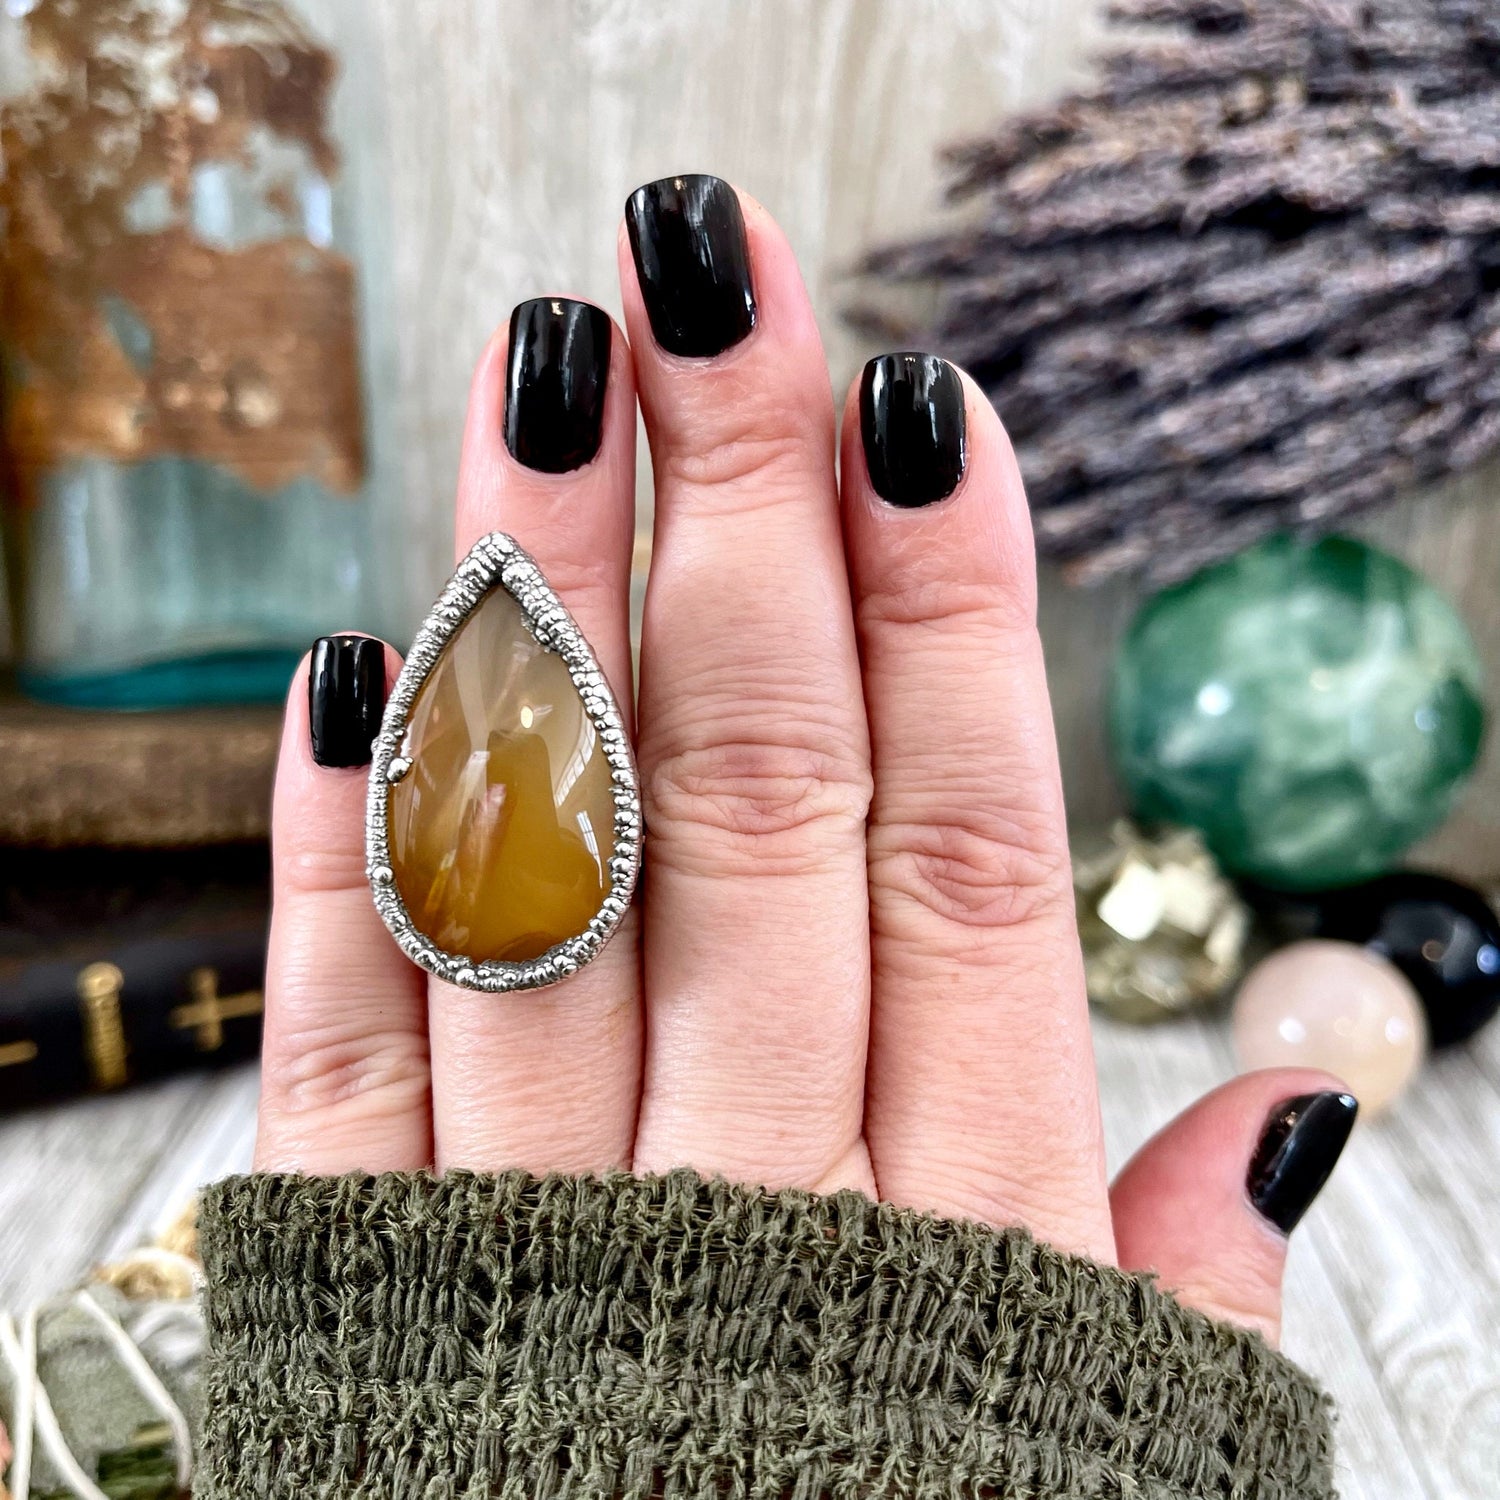 Size 6 Tube Agate Statement Ring Set in Fine Silver / Foxlark Collection - One of a Kind / Big Crystal Ring Witchy Jewelry / Gothic Jewelry